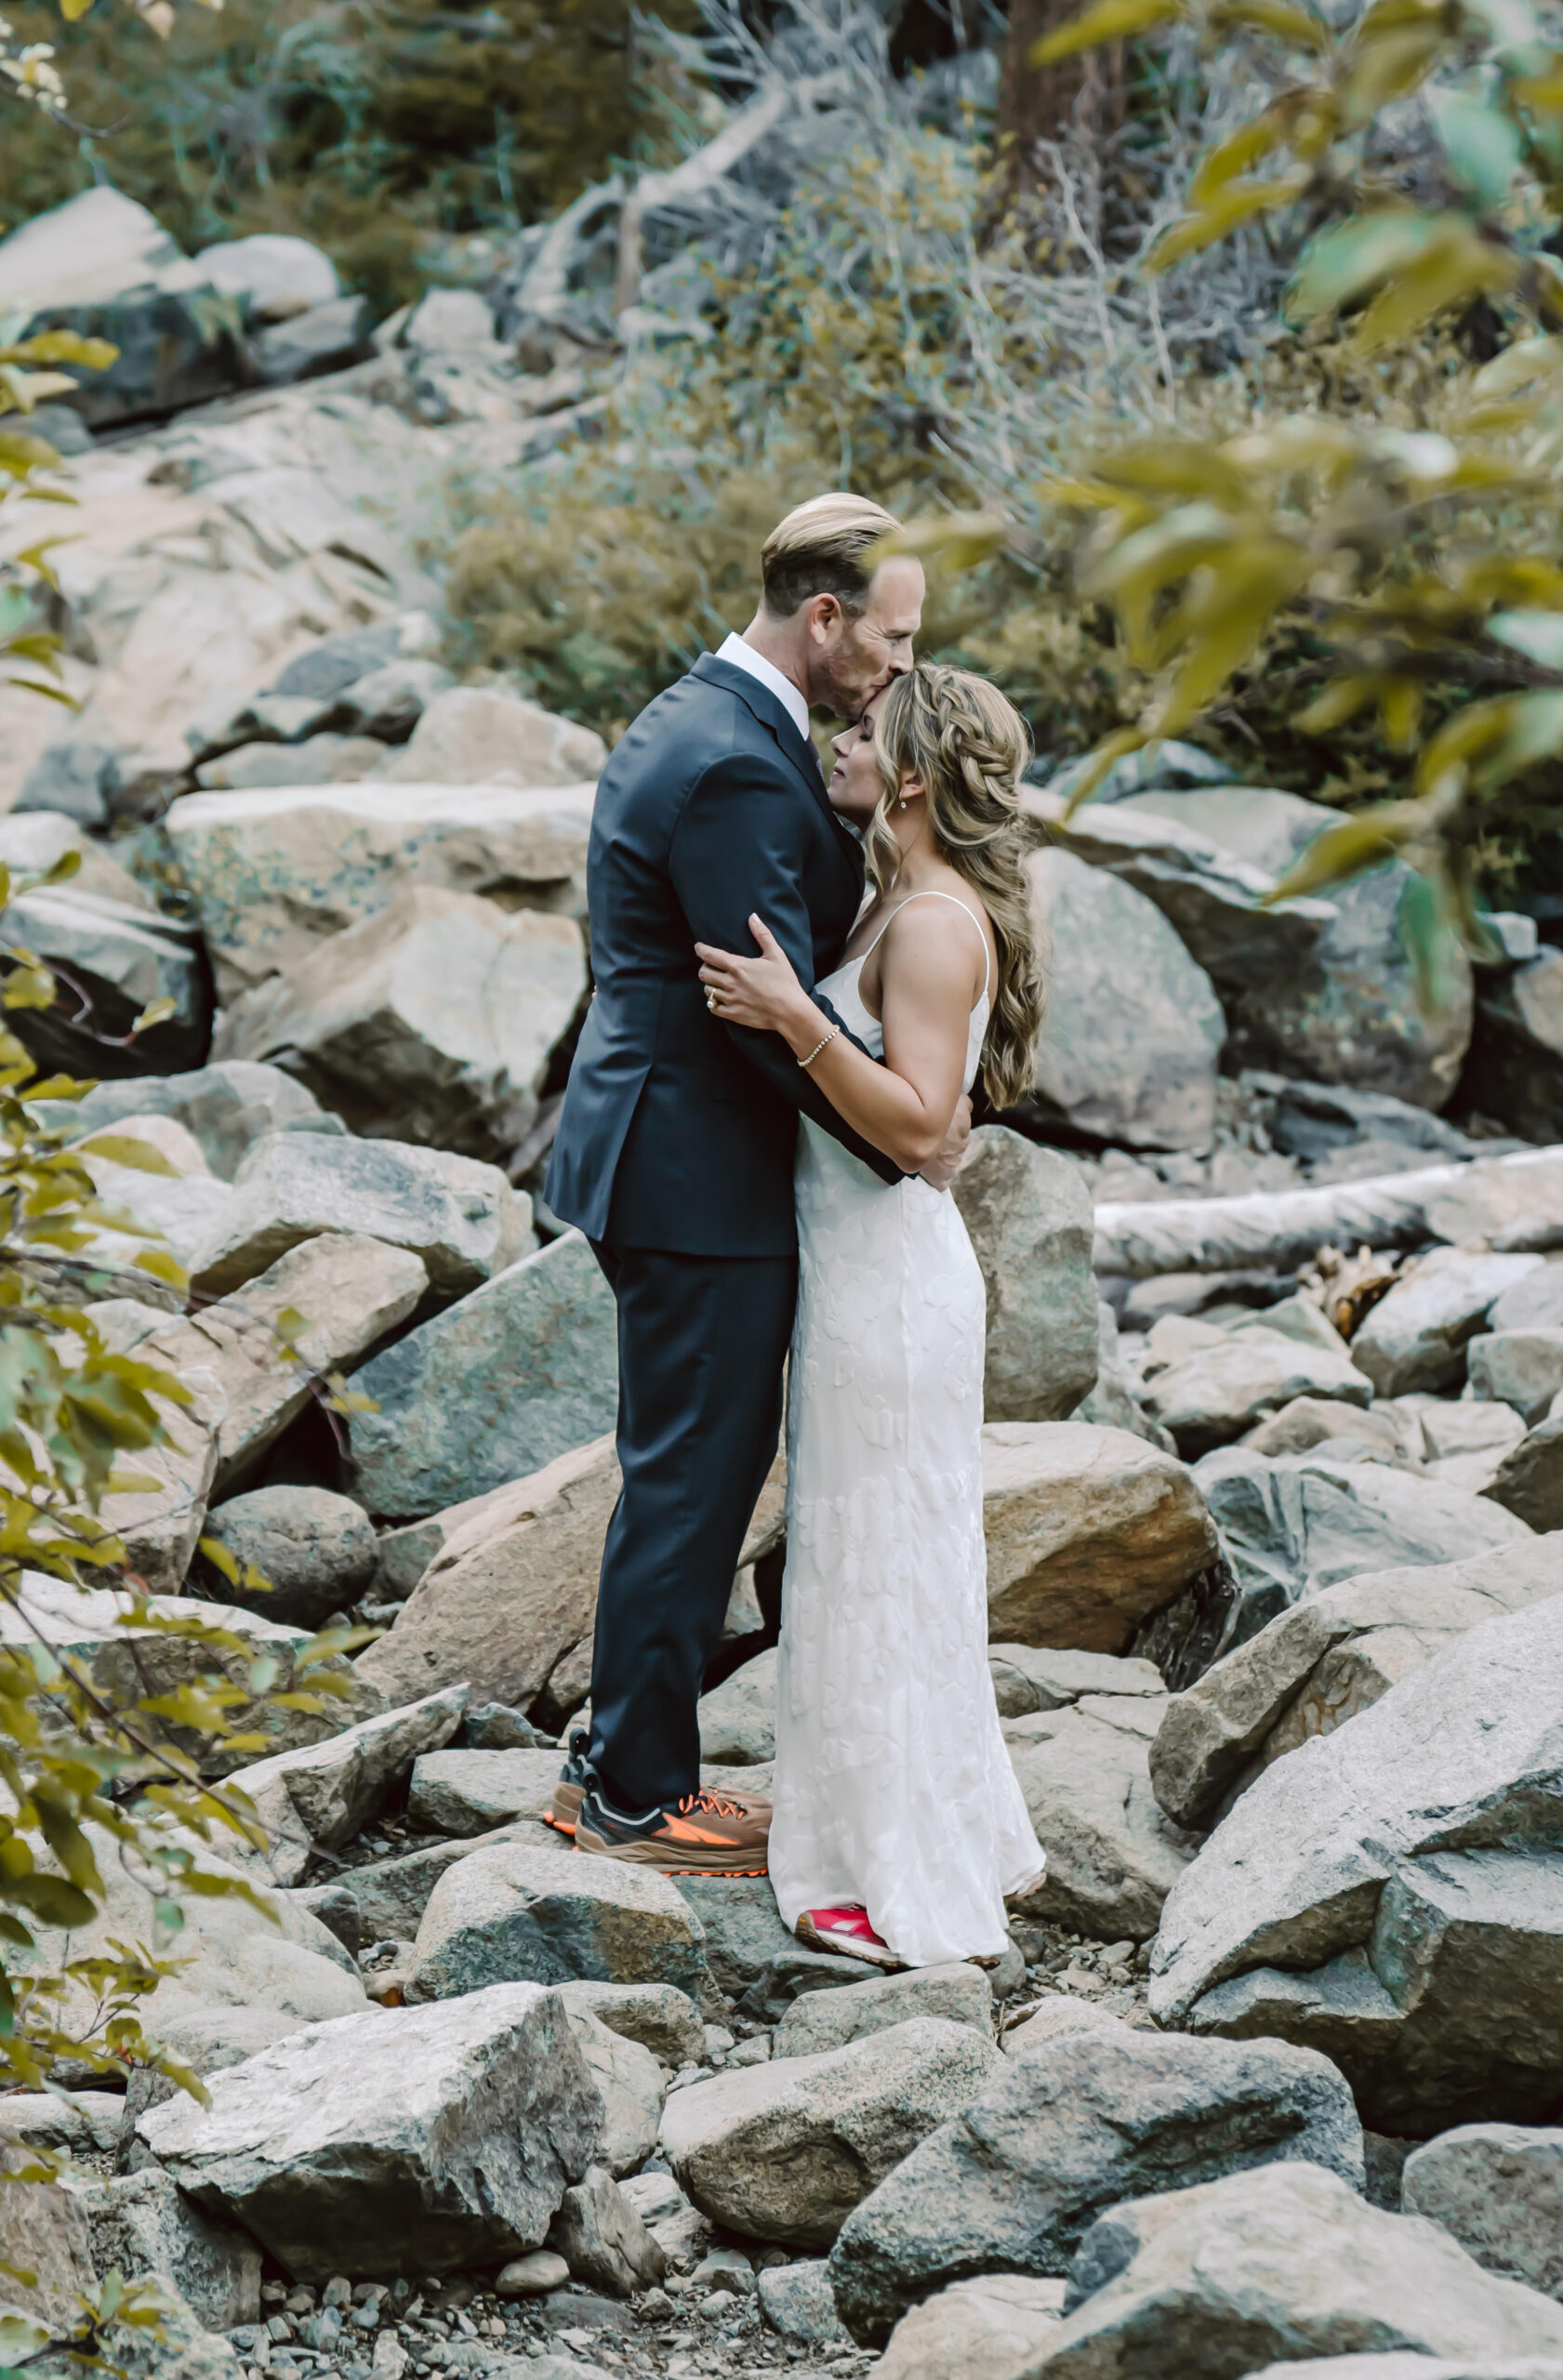 A groom kissing his bride and standing on the rocks in the forest for their nature elopement